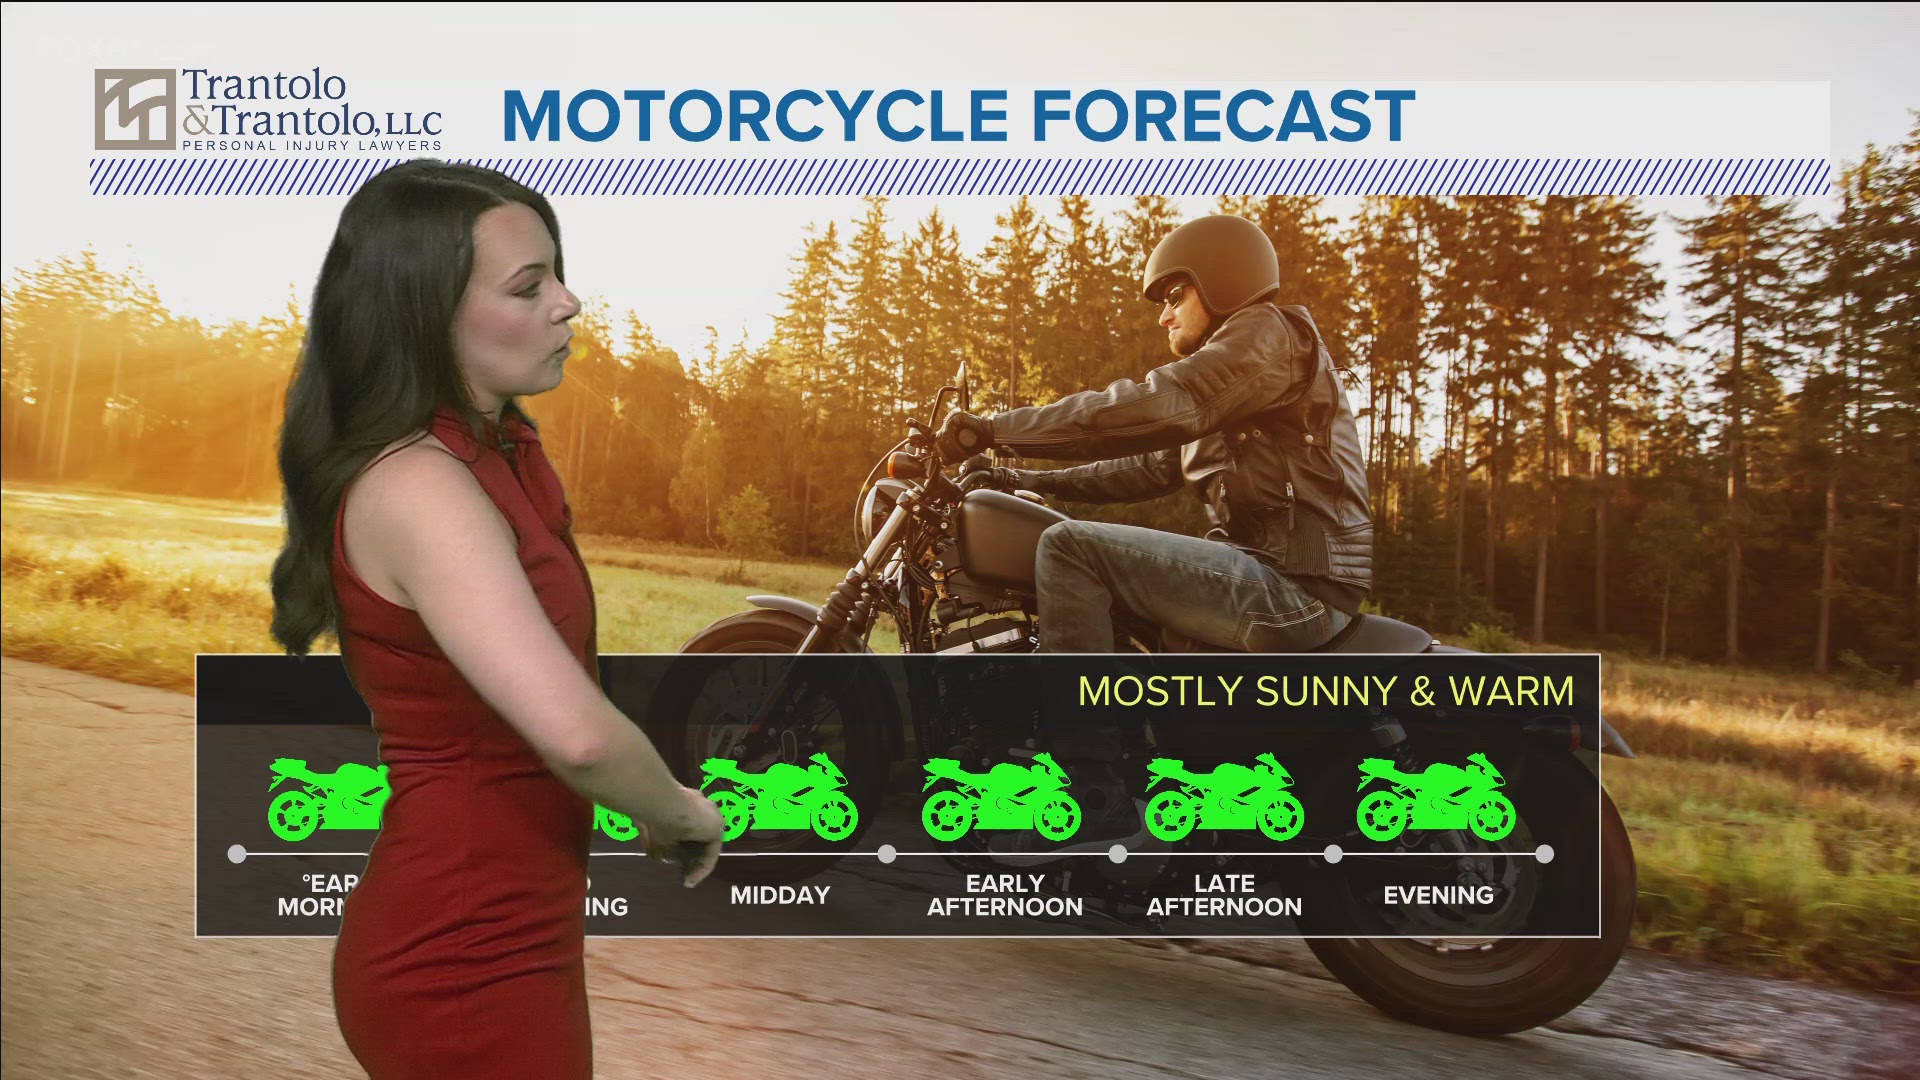 FOX61 Meteorologist Rachel Piscitelli gives an update on Connecticut's motorcycle forecast for today.